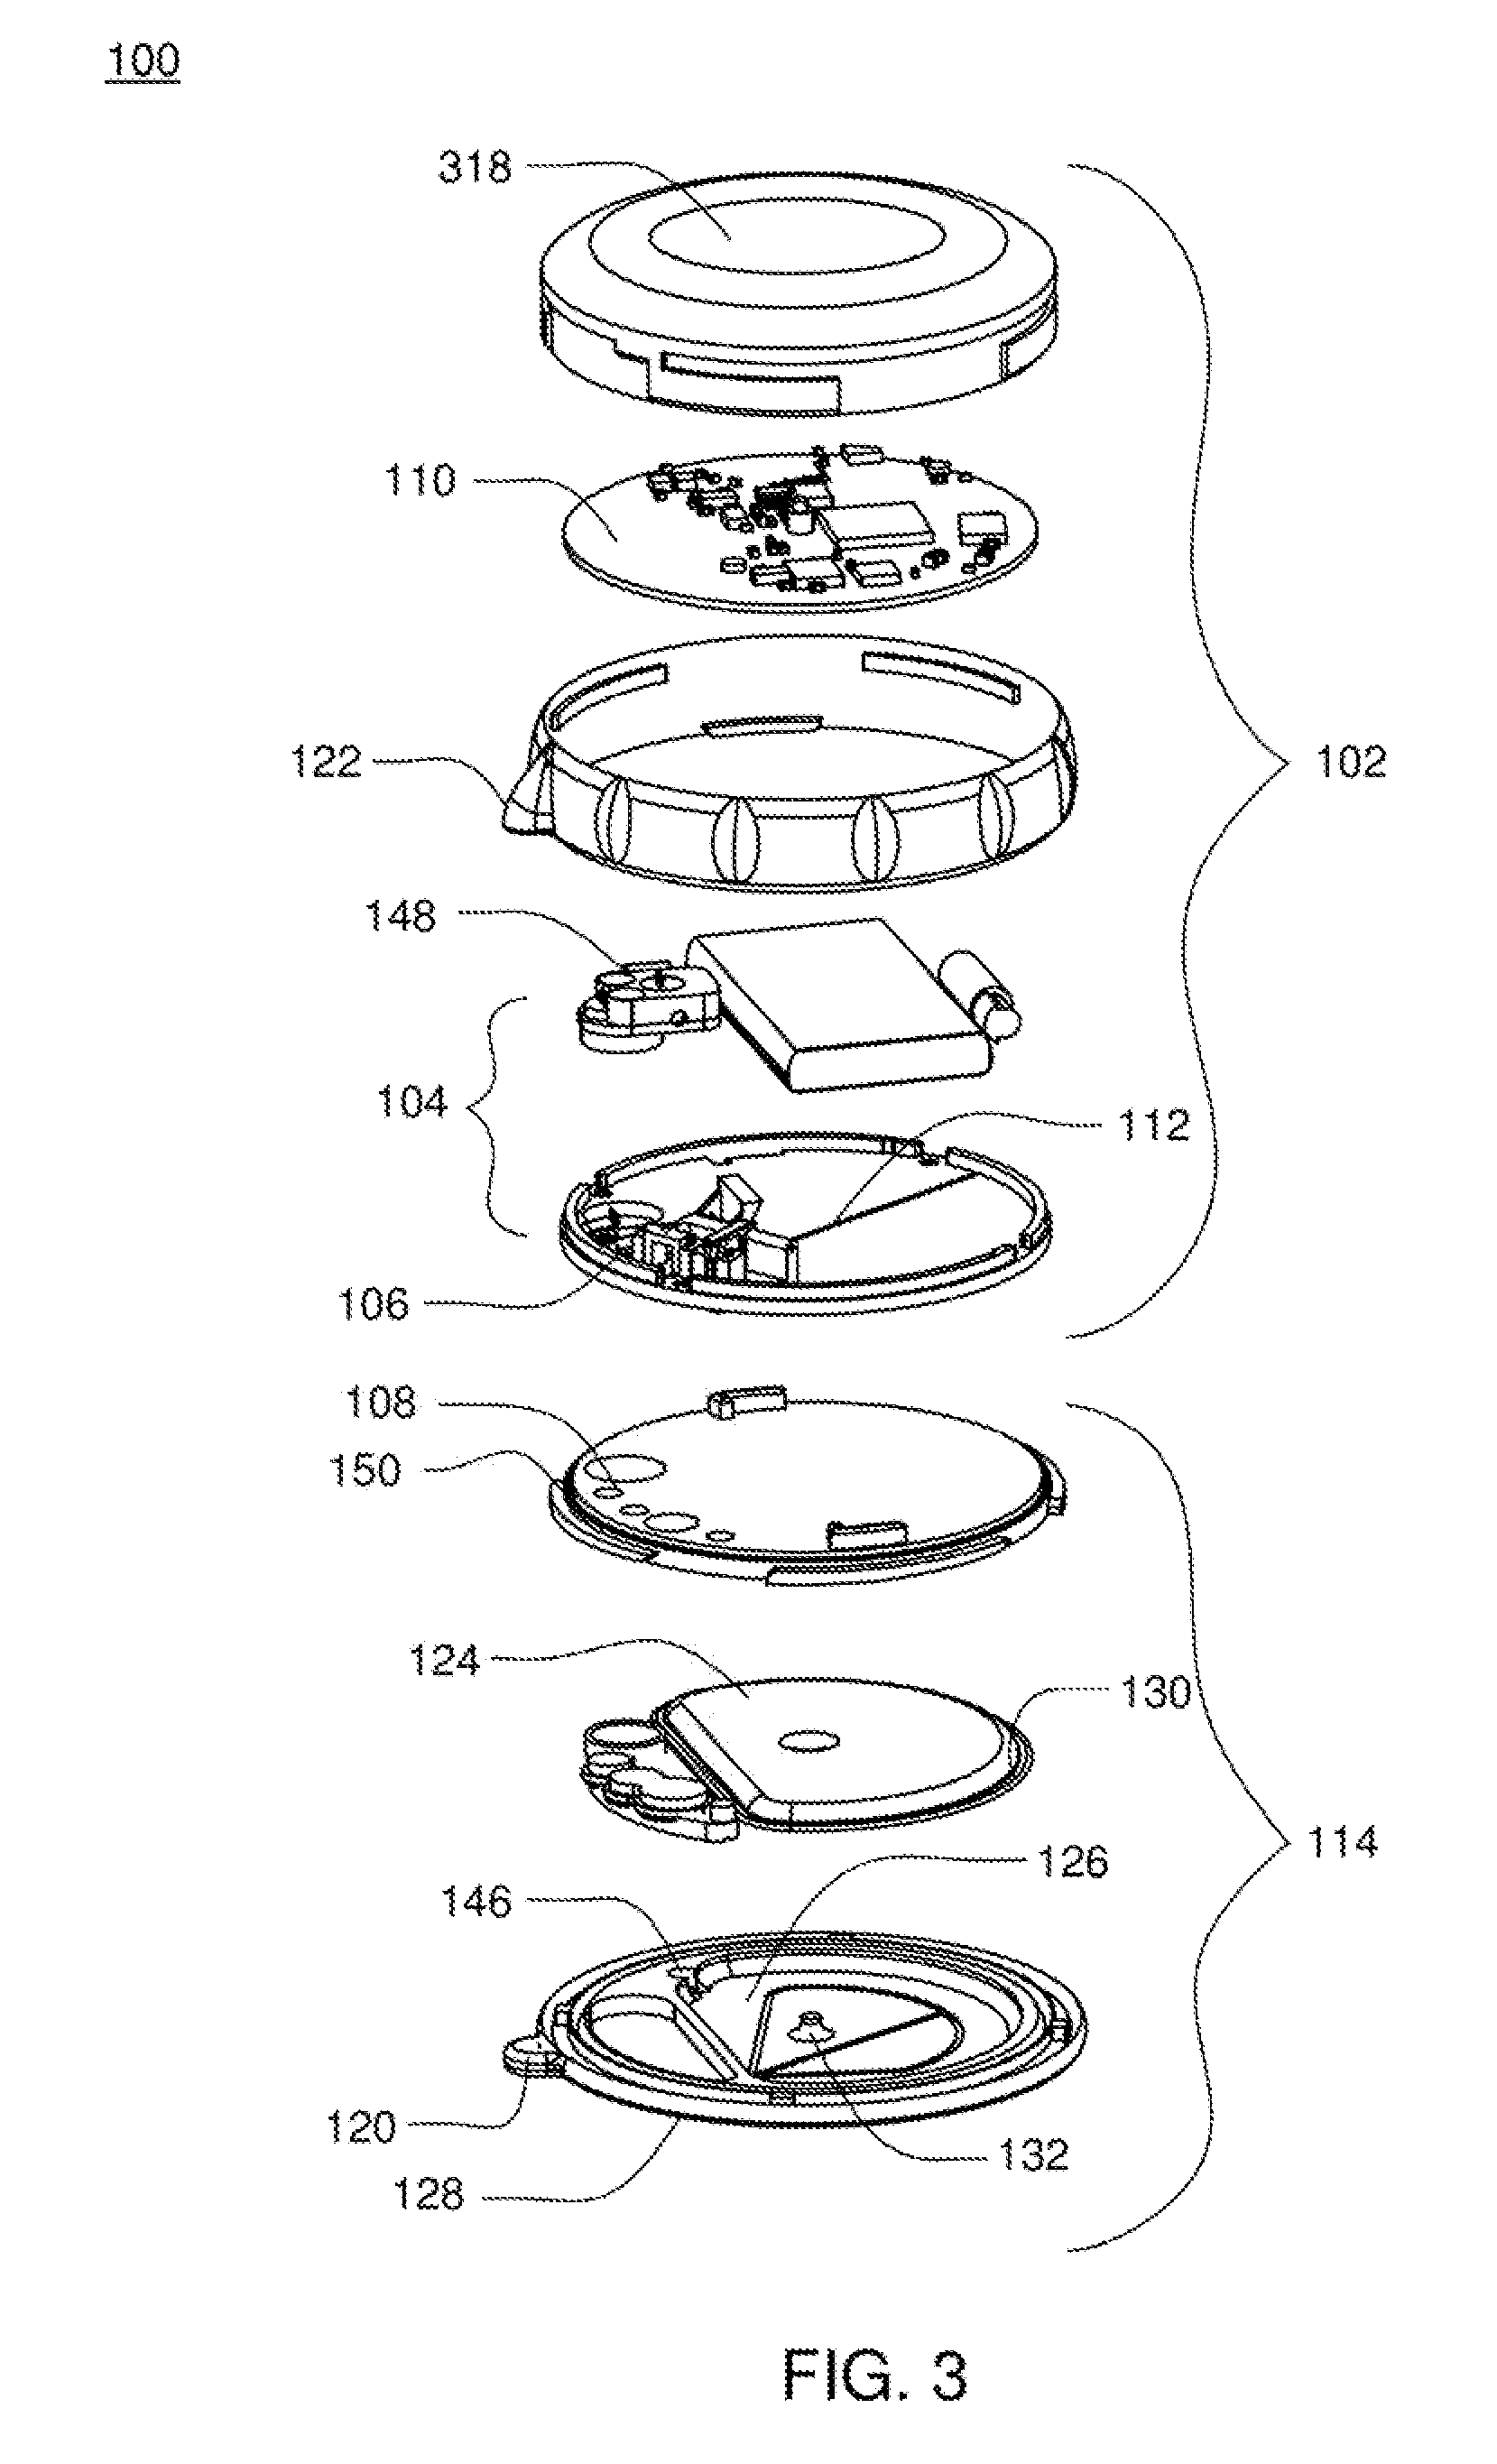 Apparatus, system and method for fluid delivery